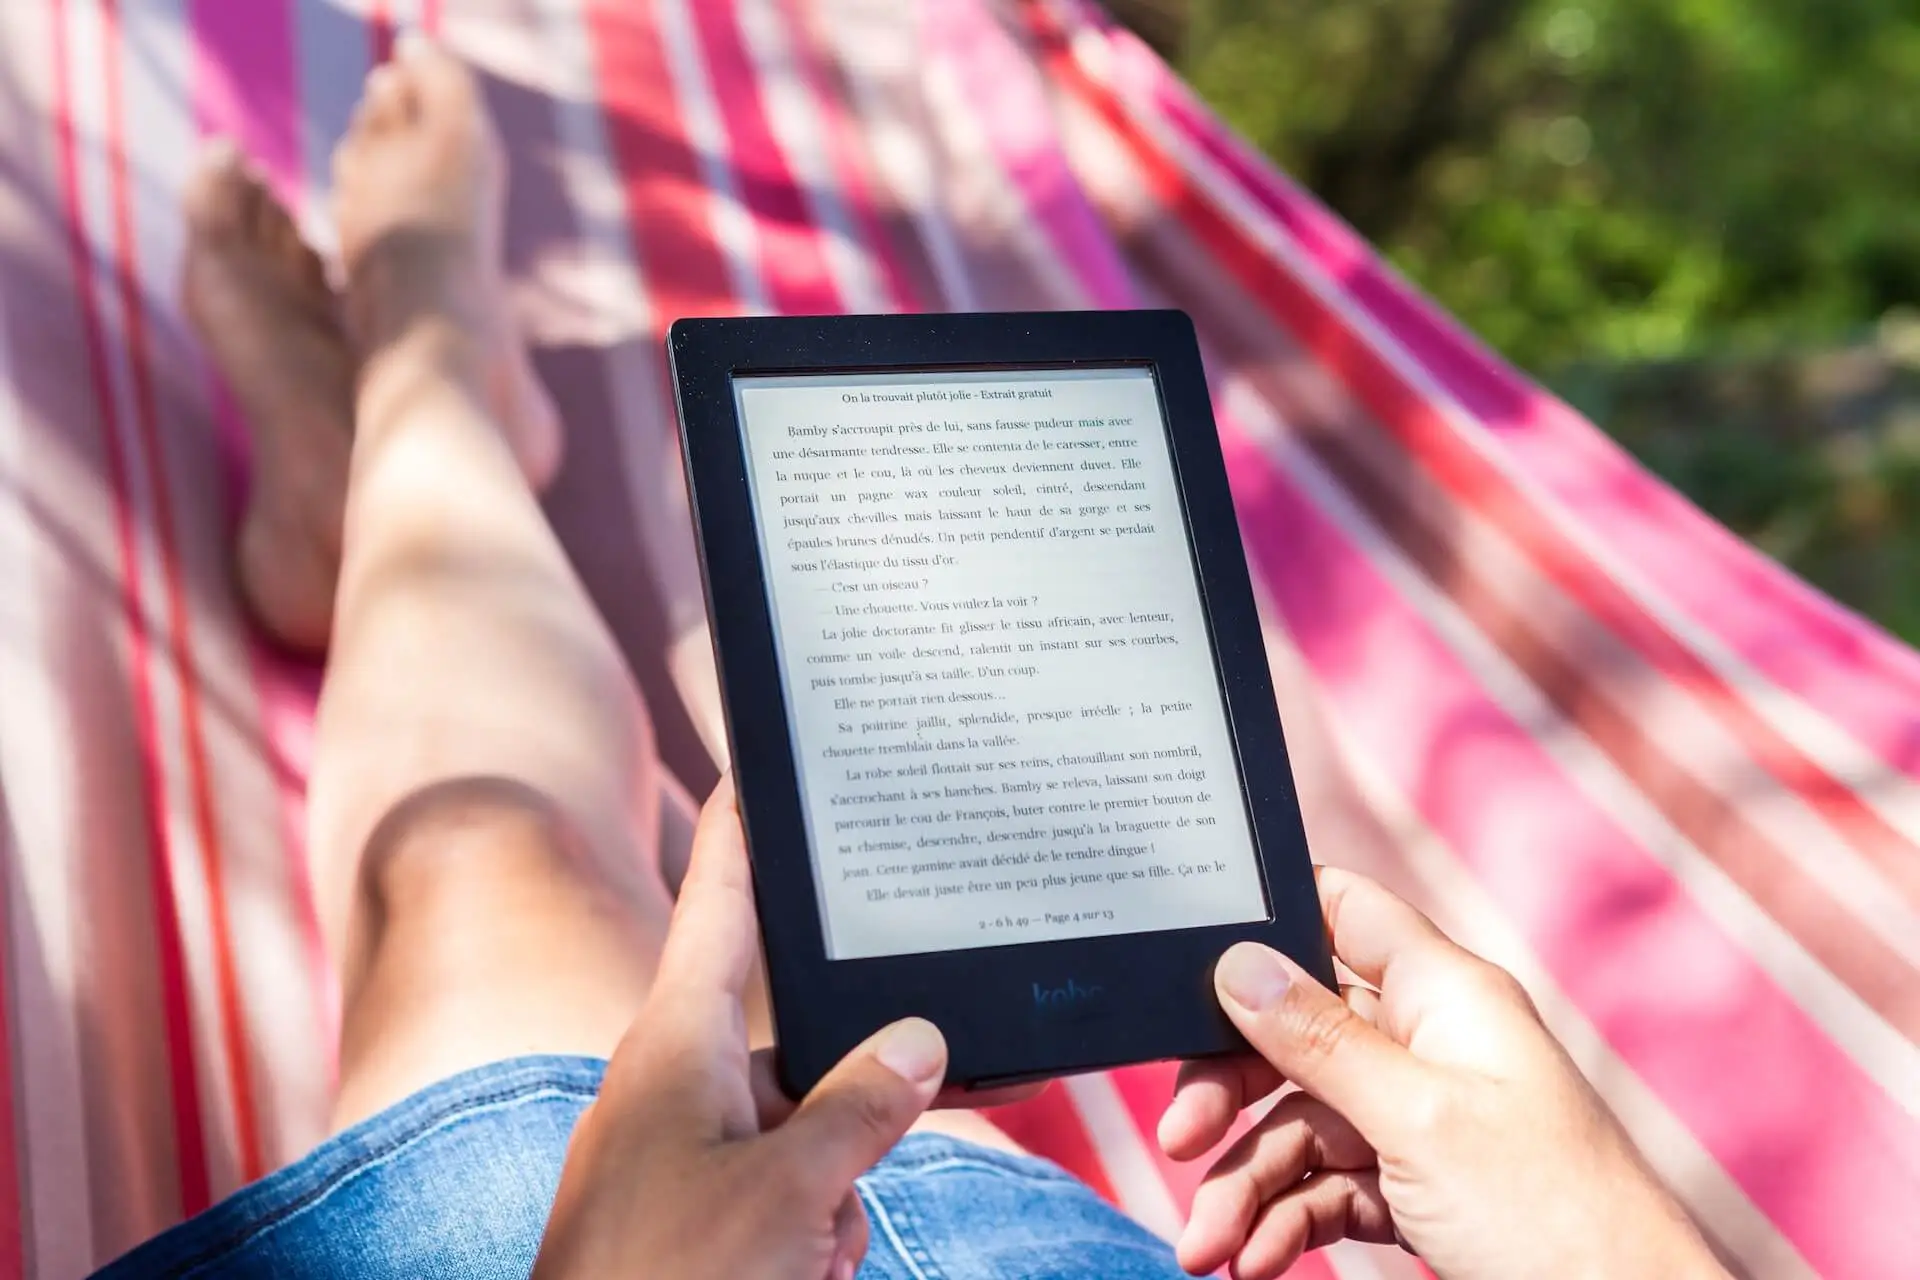 Publishing Electronic Books Is Convenient and Allows People to Read Them on the Go No Matter Where They Are